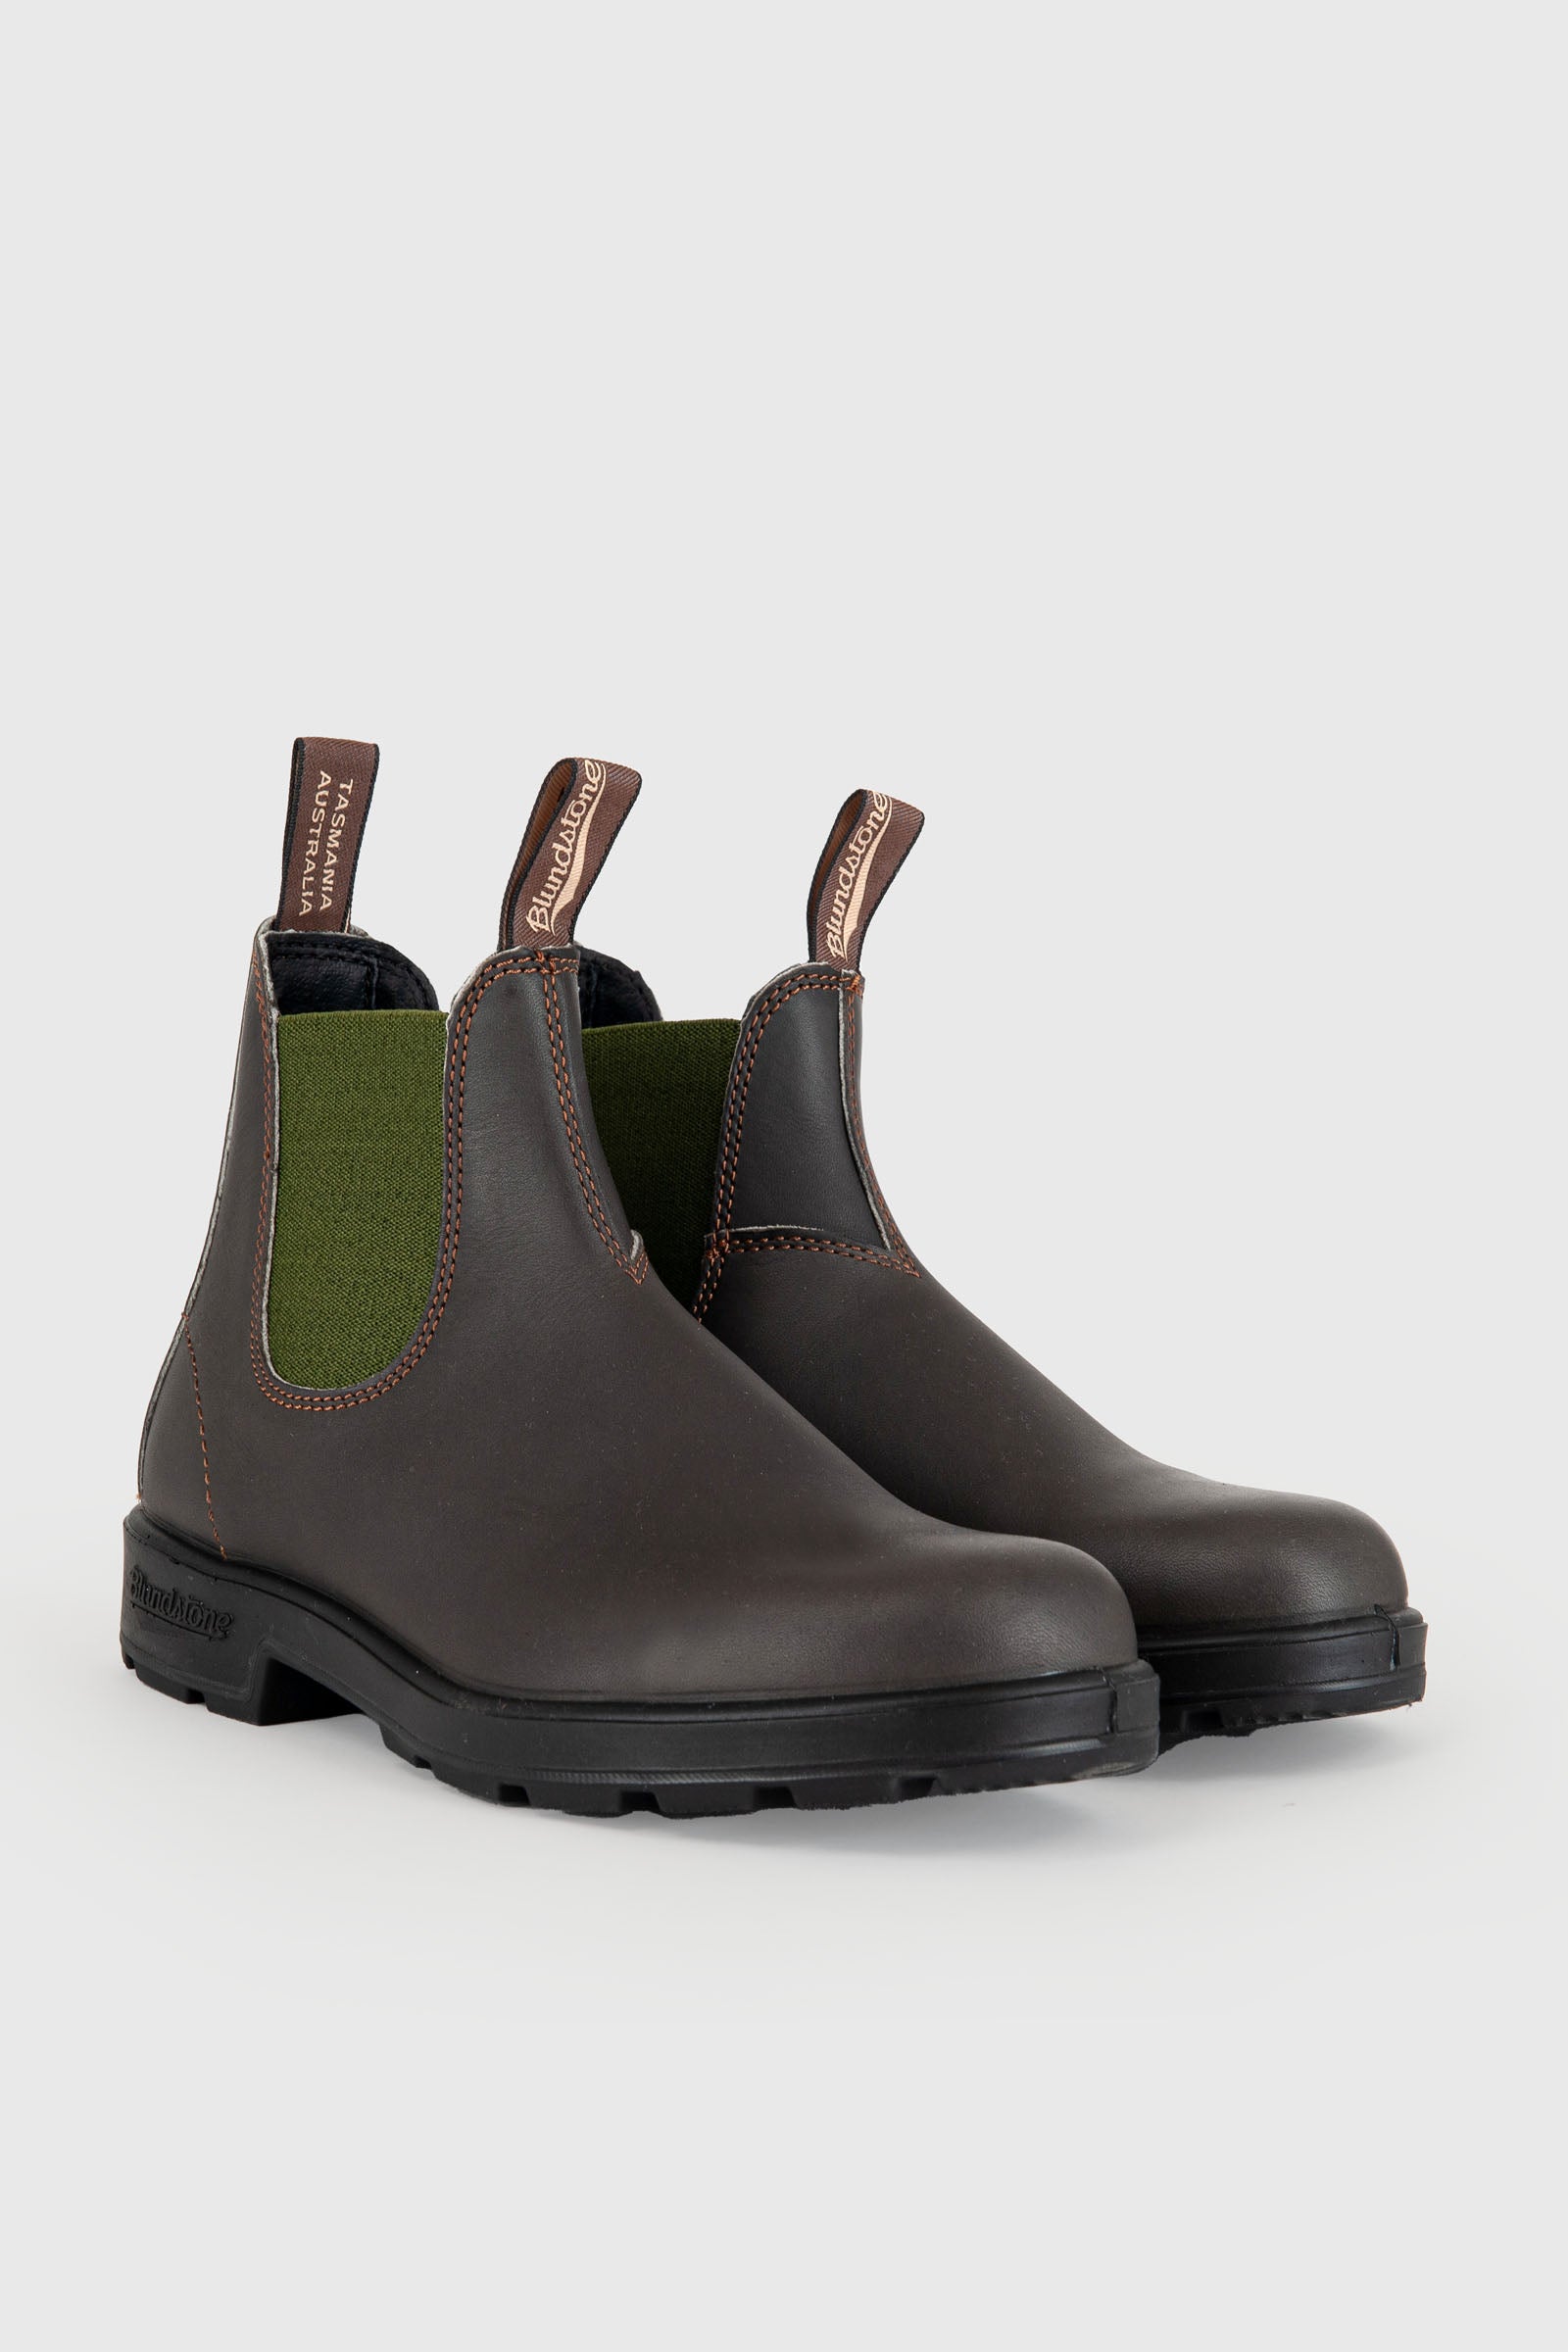 Blundstone Stivaletto Beatle 519 Pelle Stout Brown/Olive - 3